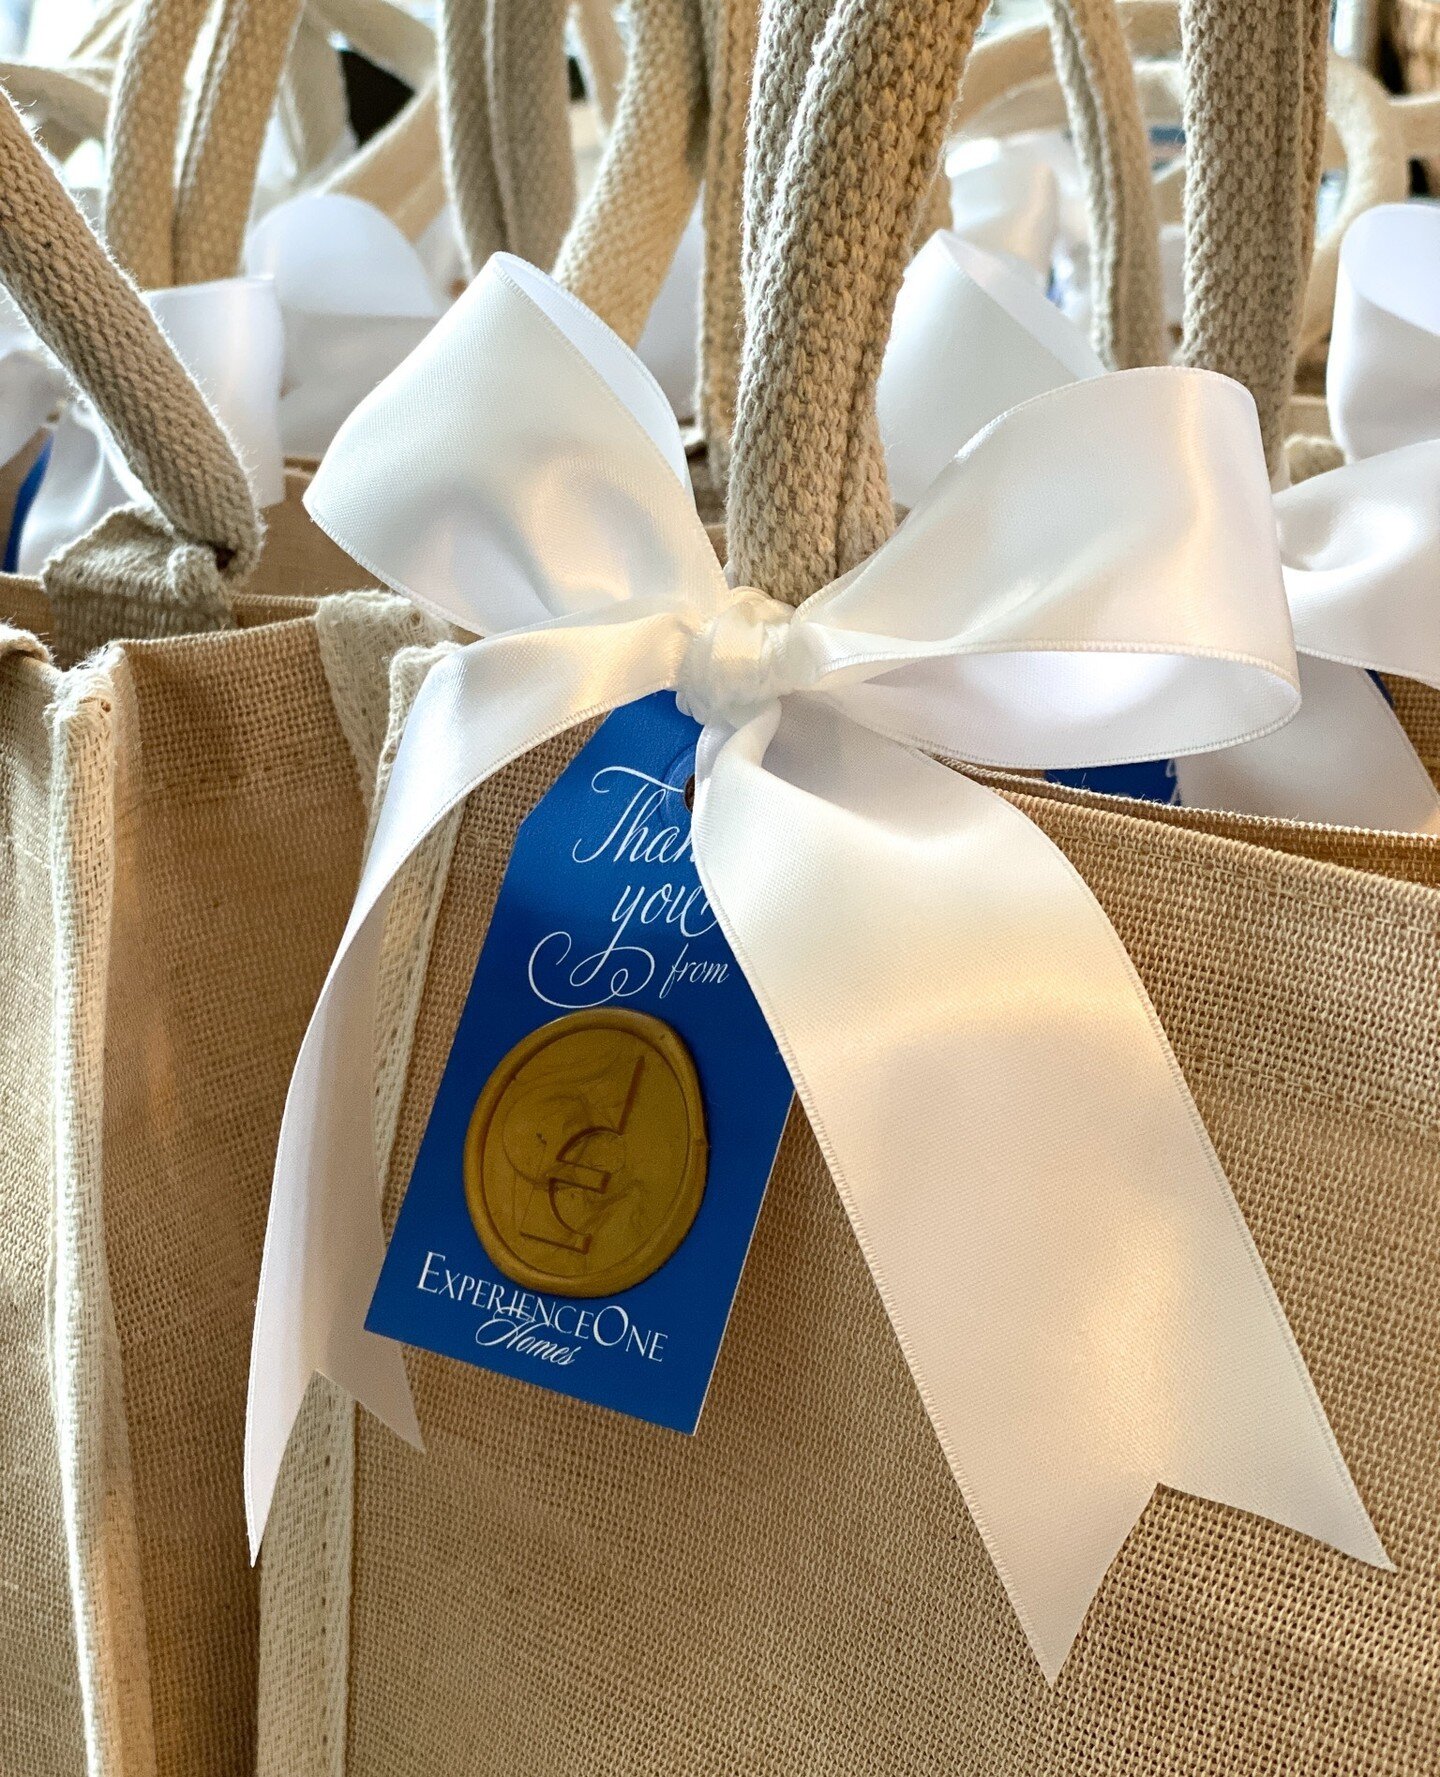 Leave your signature touch wherever you go. ✨ A custom branded wax seal and thank you tags on these closing gifts go the extra mile! ⁠
⁠
⁠
⁠
⁠
⁠
⁠
⁠
⁠
⁠
⁠
⁠
⁠
#BusinessGifting #CustomGifts #ClientGifts #CustomBranding #BrandedGifts #GiftBox #Employee